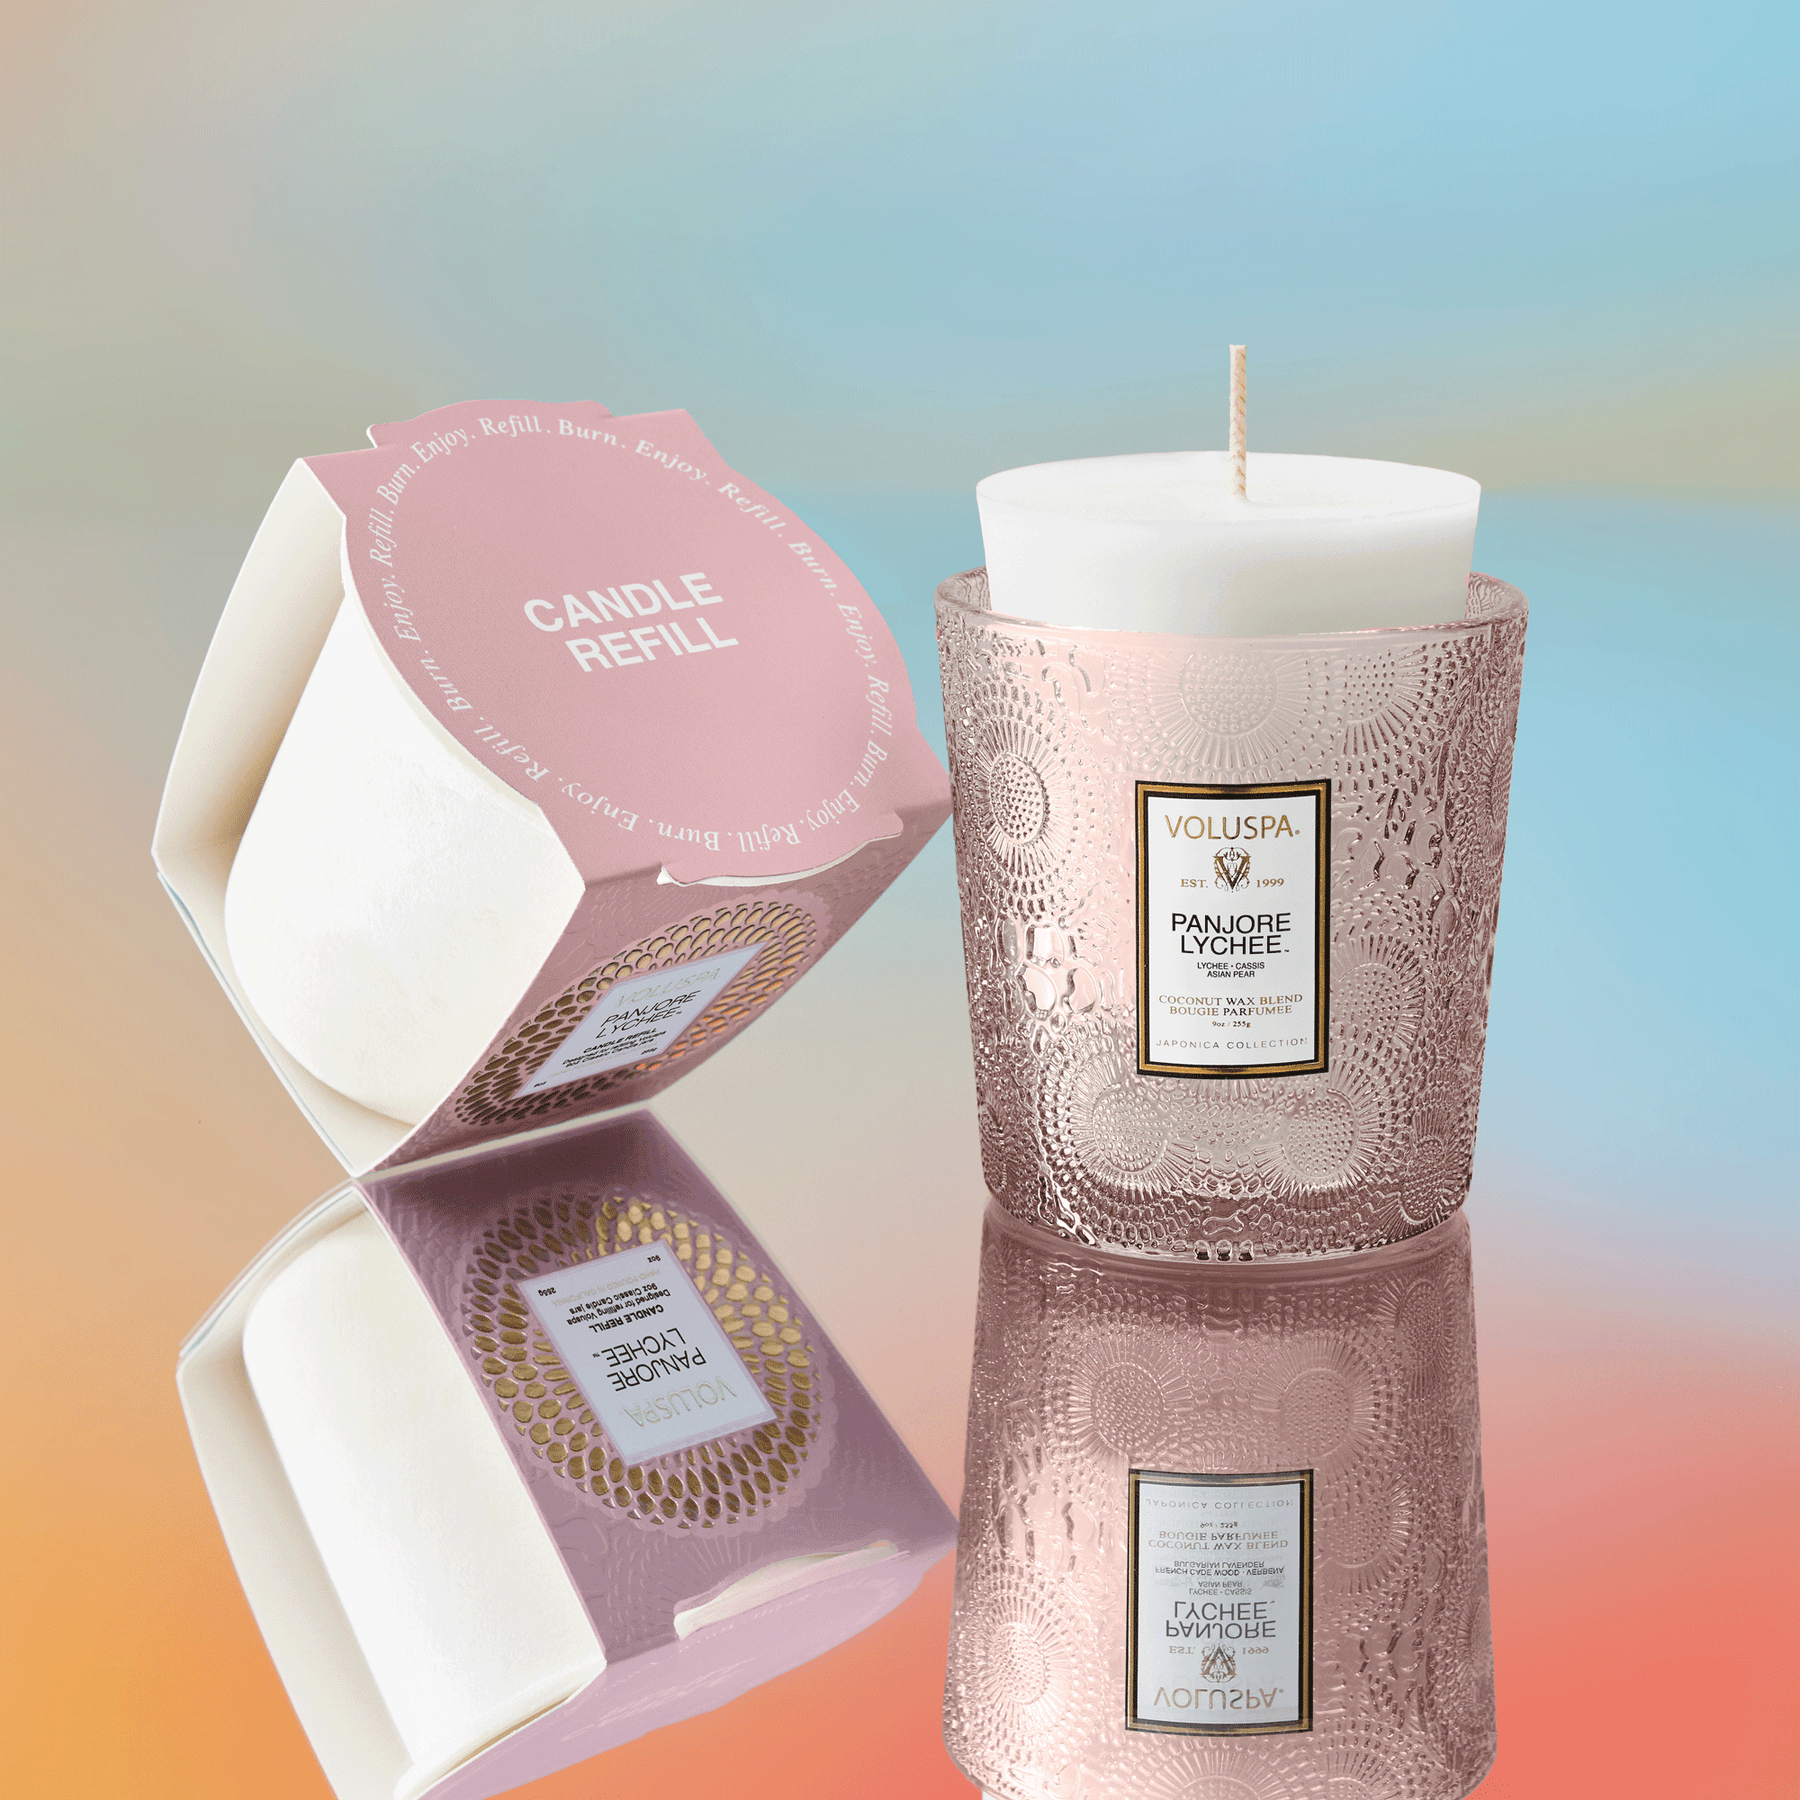 Panjore Lychee - Classic Candle & Refill